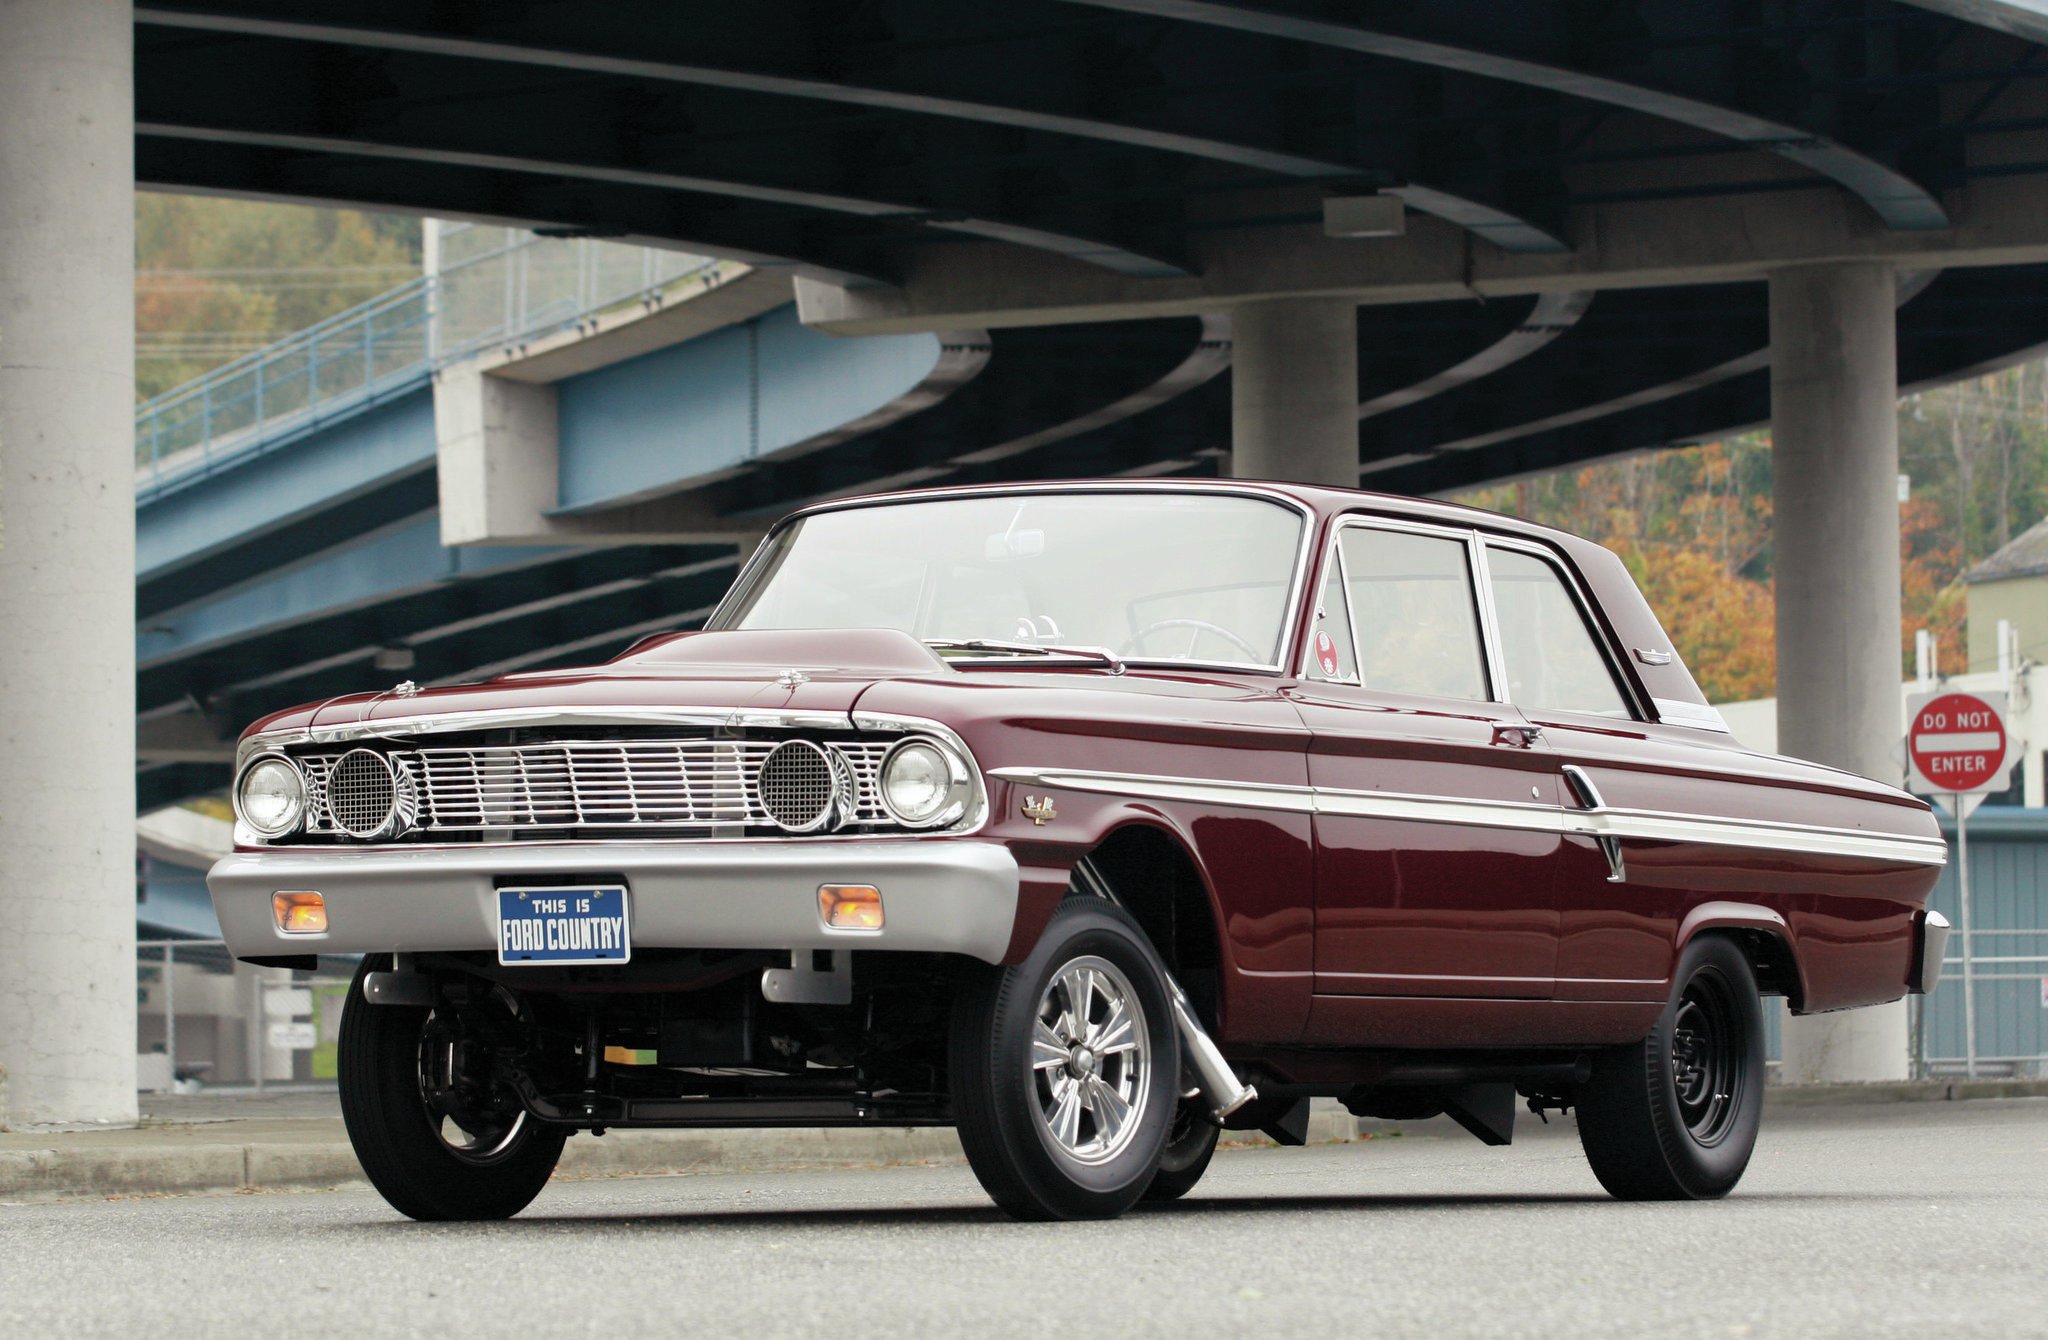 1964 Ford Fairlane Backgrounds, Compatible - PC, Mobile, Gadgets| 2048x1340 px